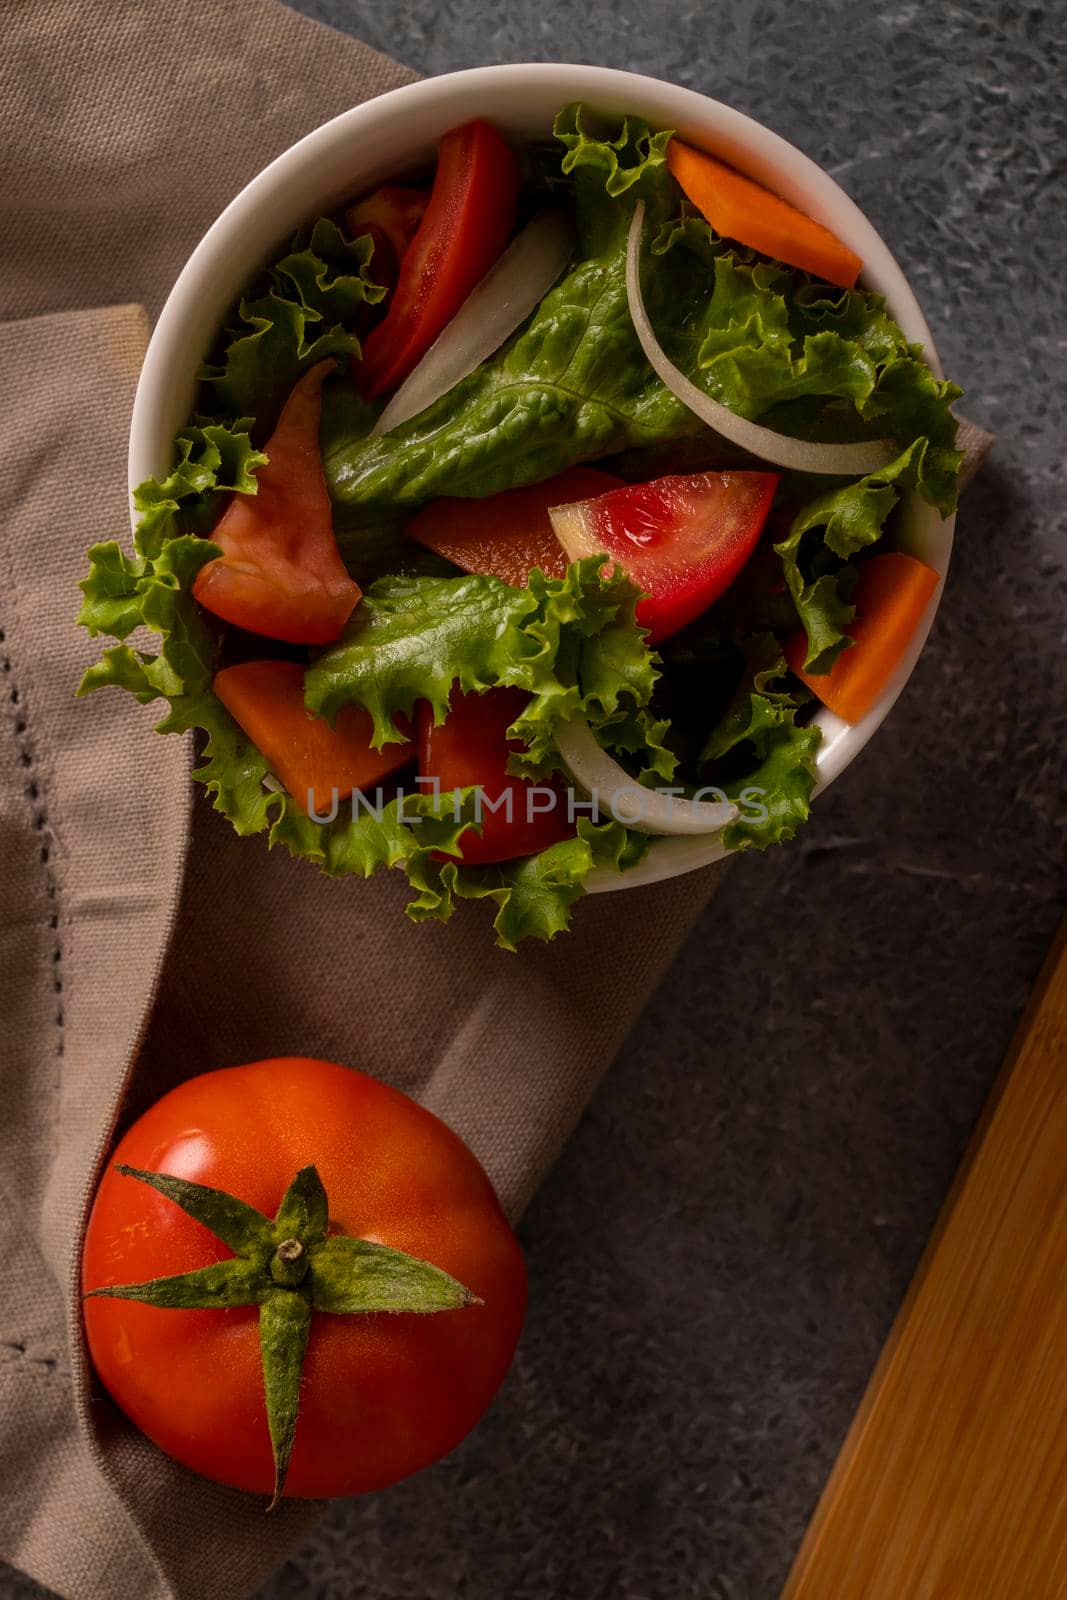 Tomatoes in salad inside a white bowl on grayish background by eagg13